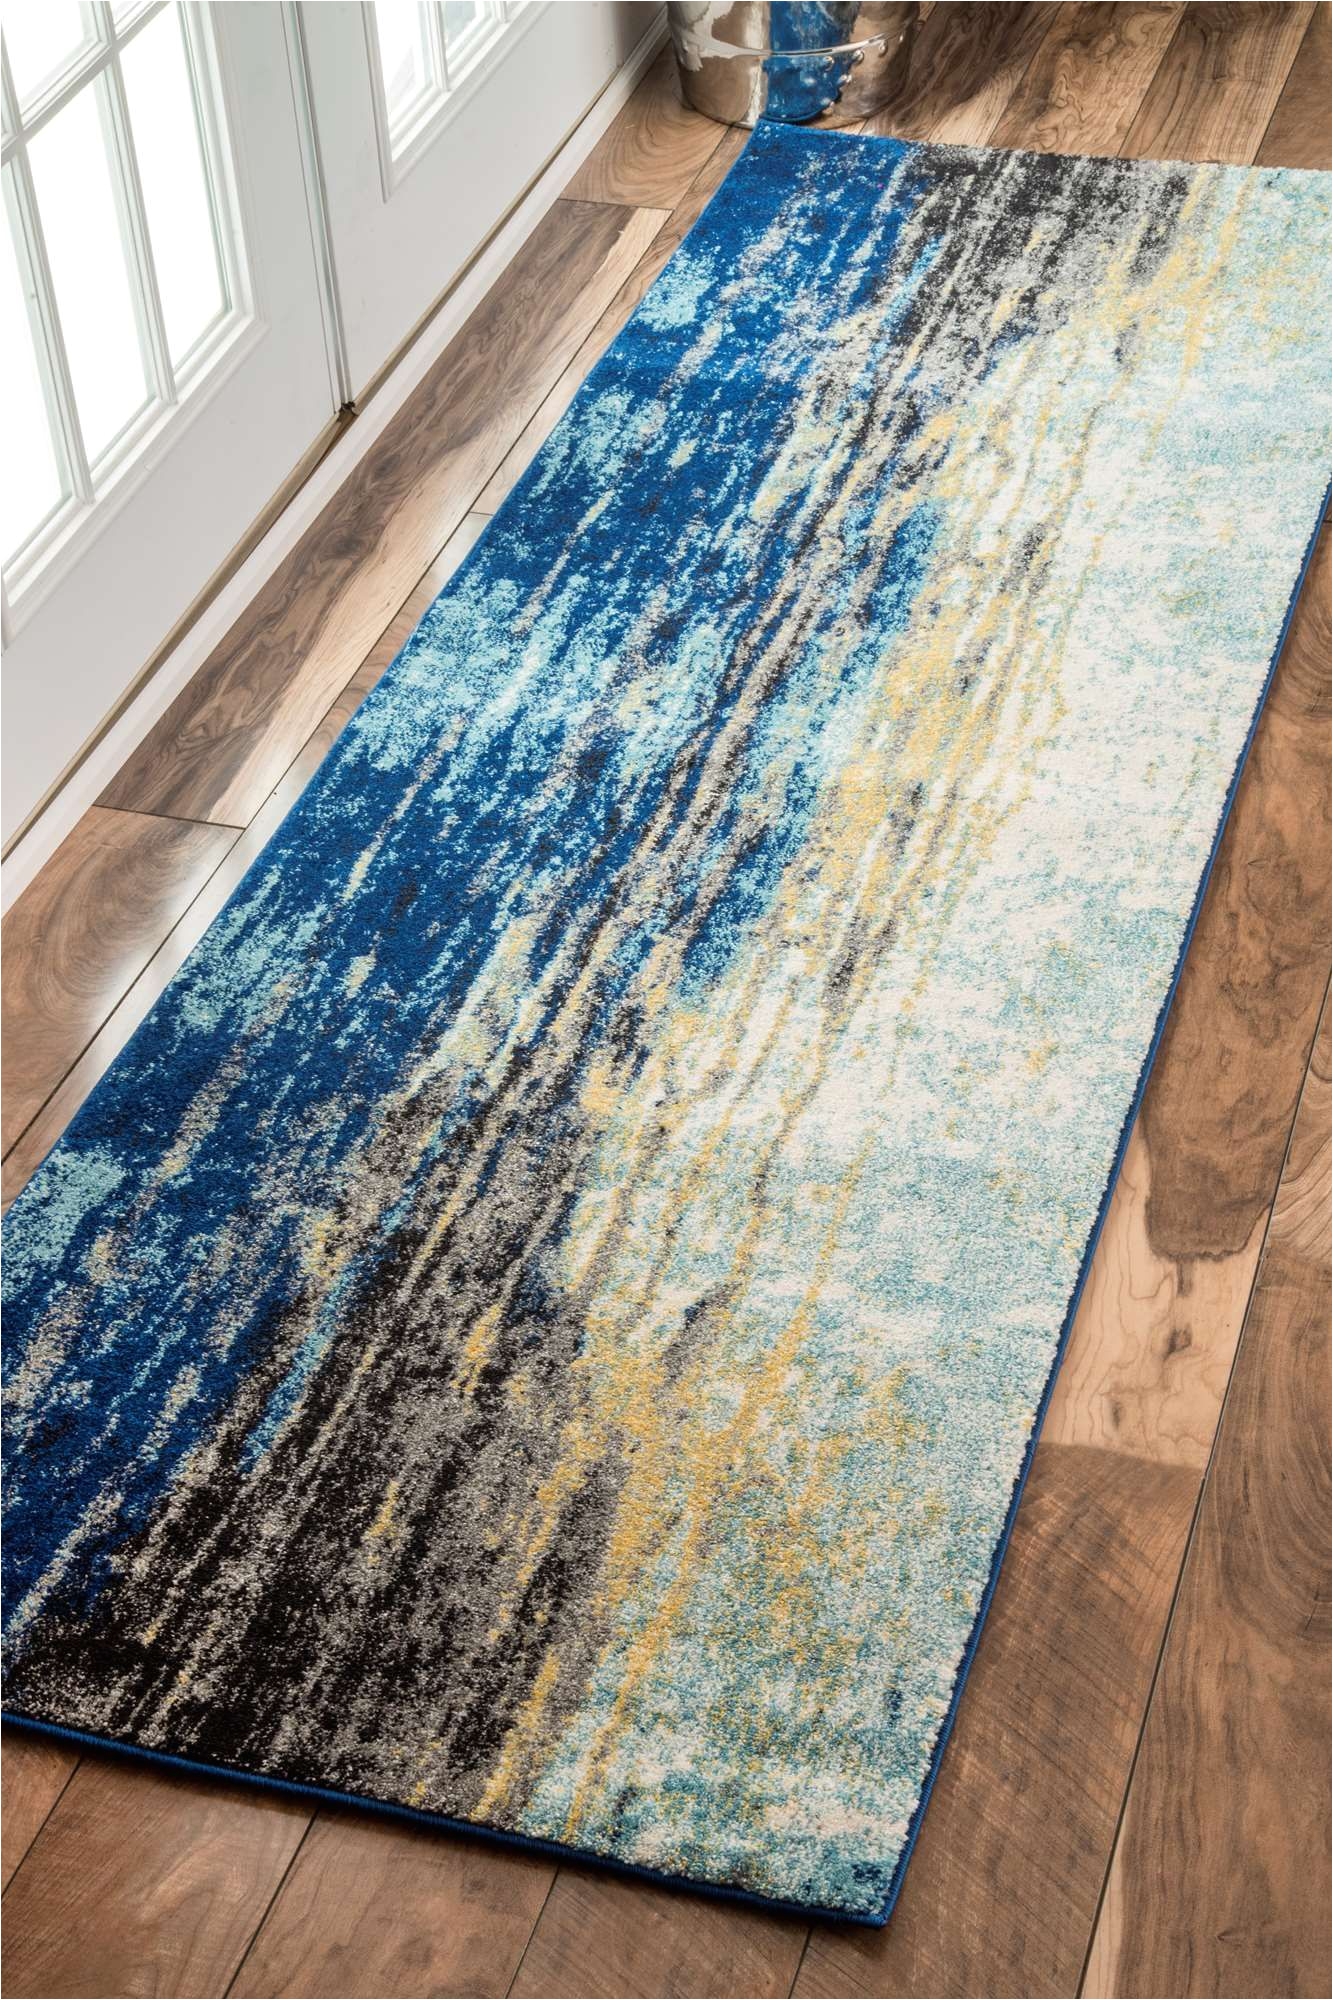 bring in the marine theme and a beautiful vintage charm to your home with this 100 percent polypropylene machine woven abstract waterfall rug